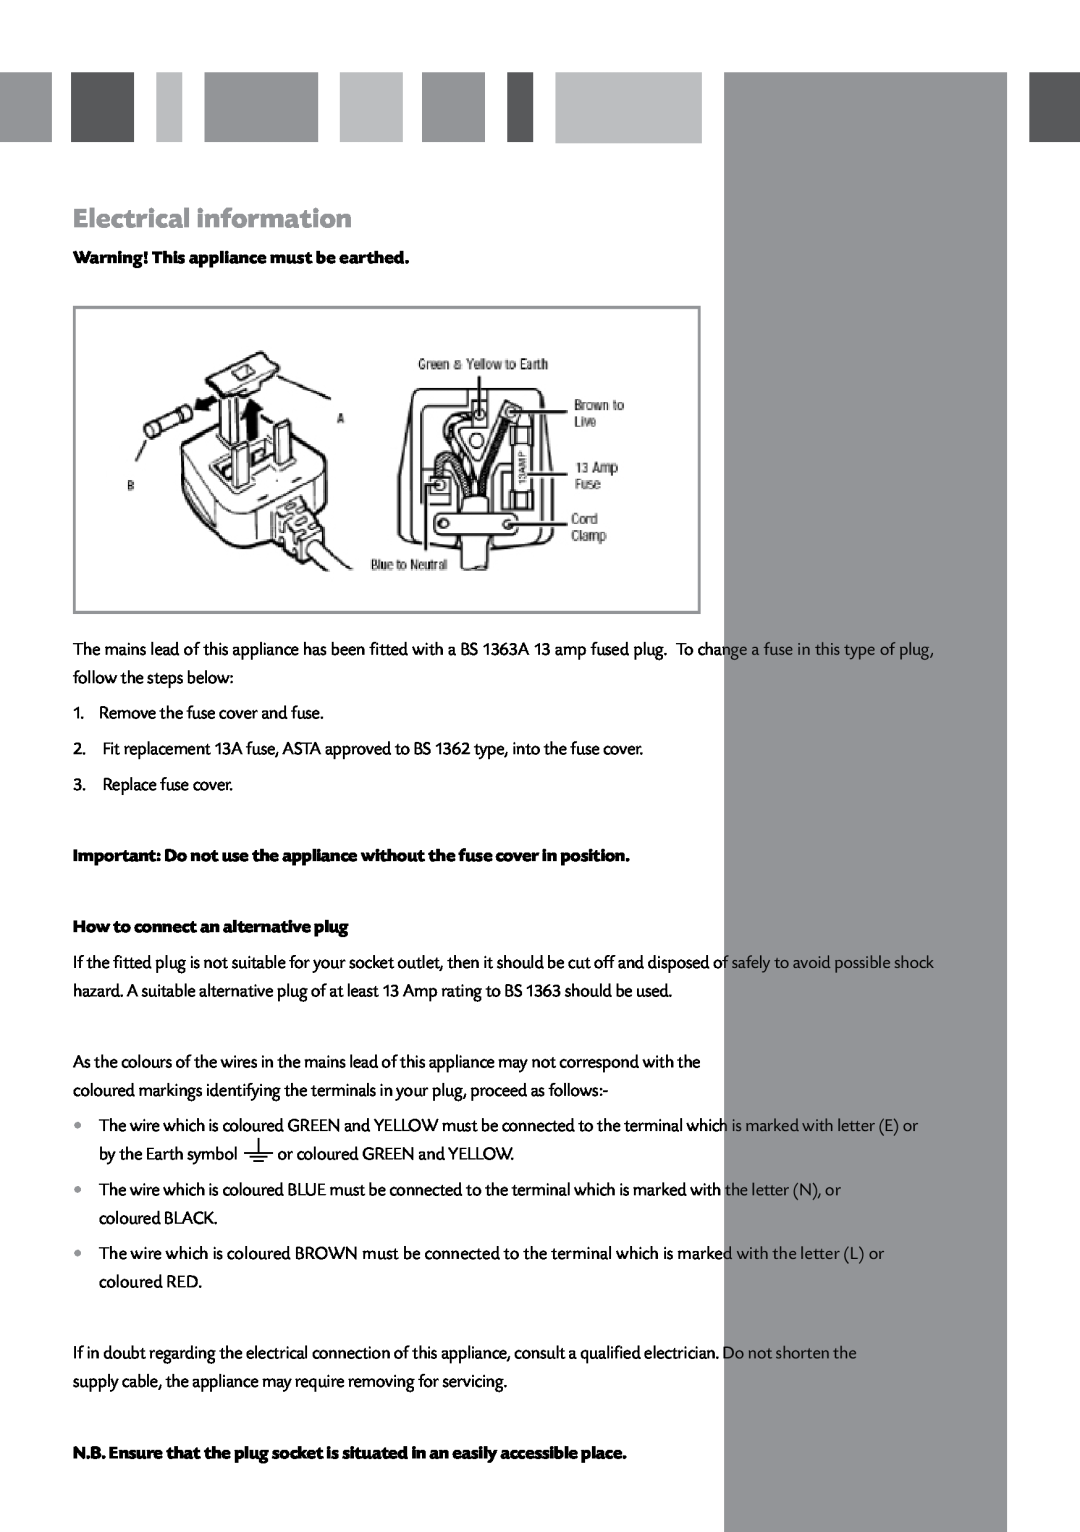 CDA FW820 manual Electrical information, Warning! This appliance must be earthed, How to connect an alternative plug 